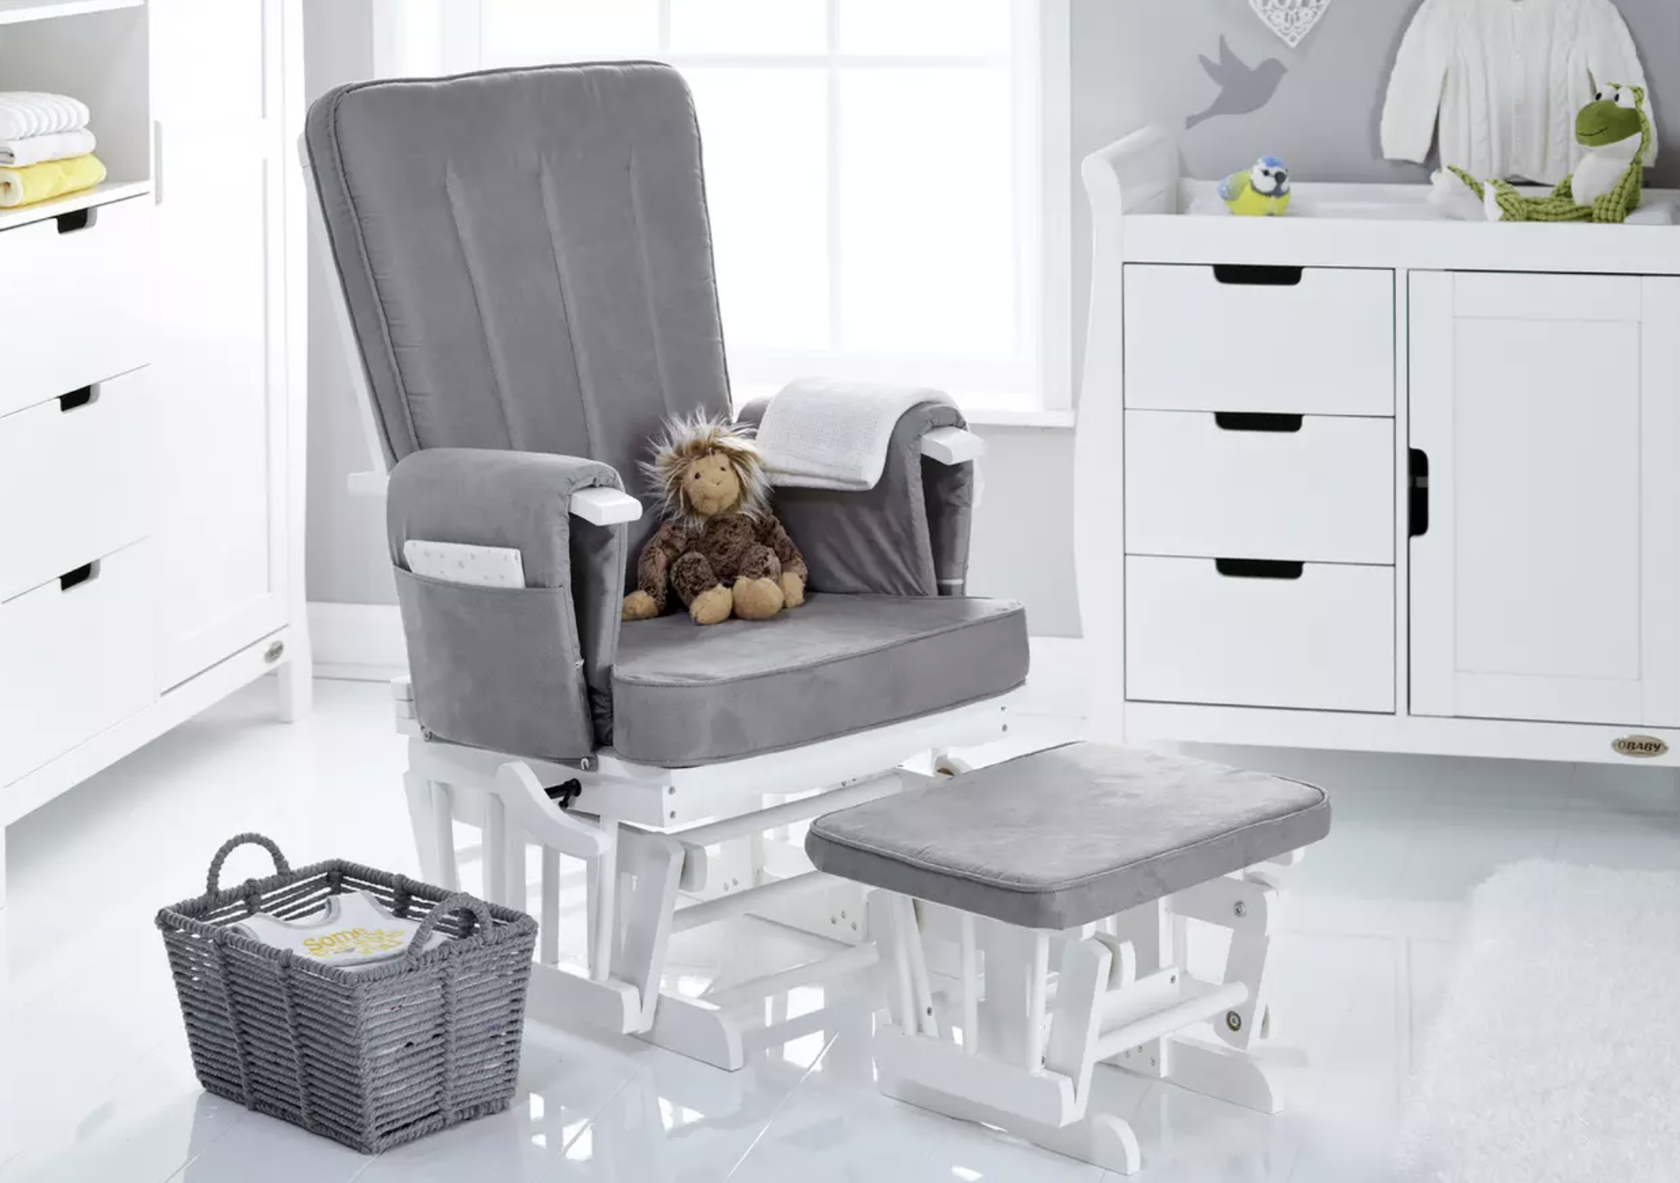 Best nursing chairs 5 top feeding chairs for mums and babies Real Homes